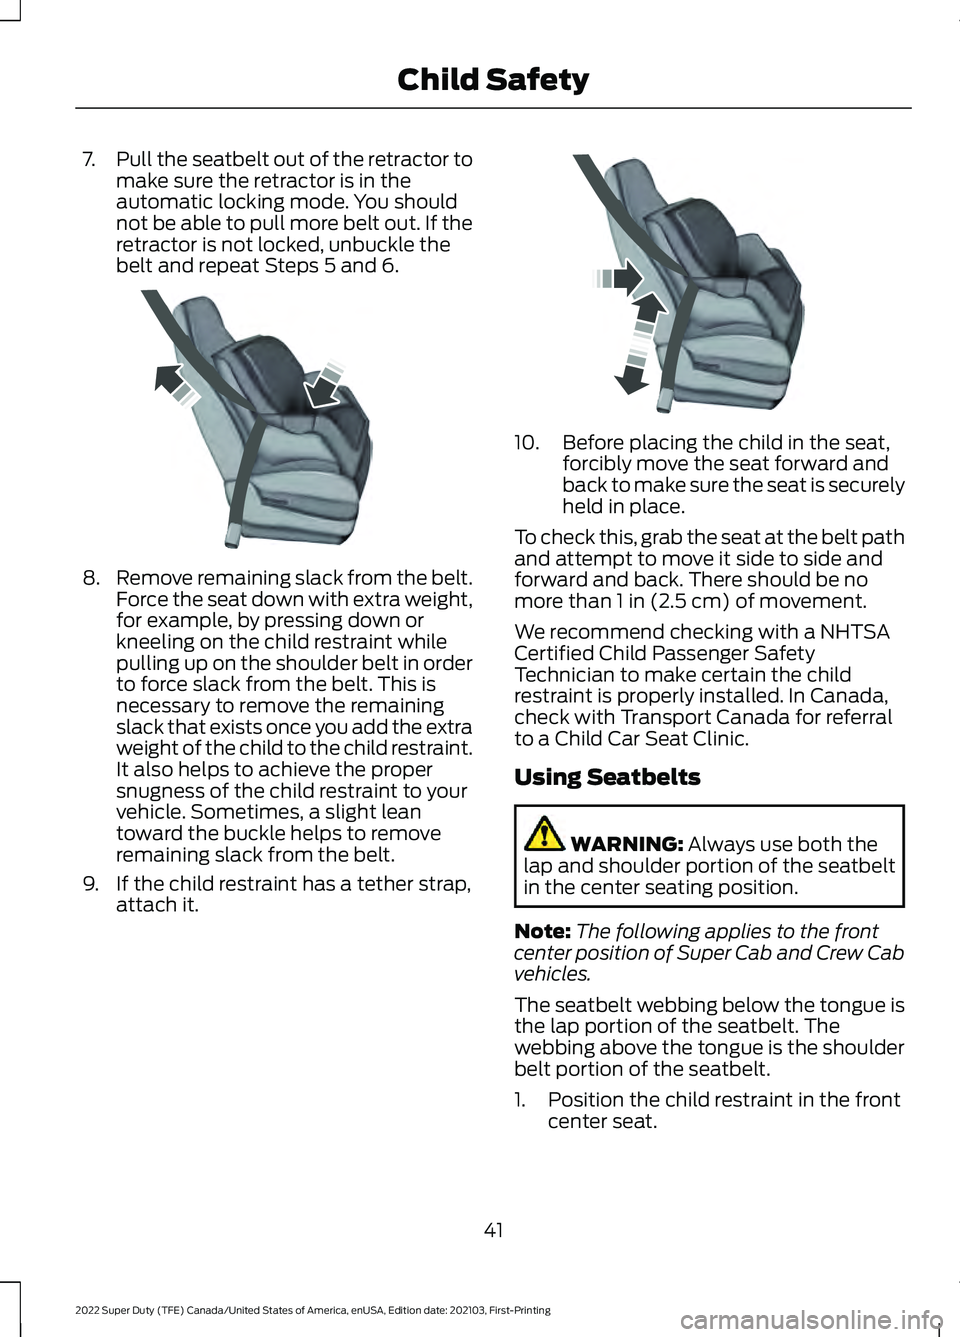 FORD F-550 2022  Owners Manual 7.
Pull the seatbelt out of the retractor to
make sure the retractor is in the
automatic locking mode. You should
not be able to pull more belt out. If the
retractor is not locked, unbuckle the
belt a